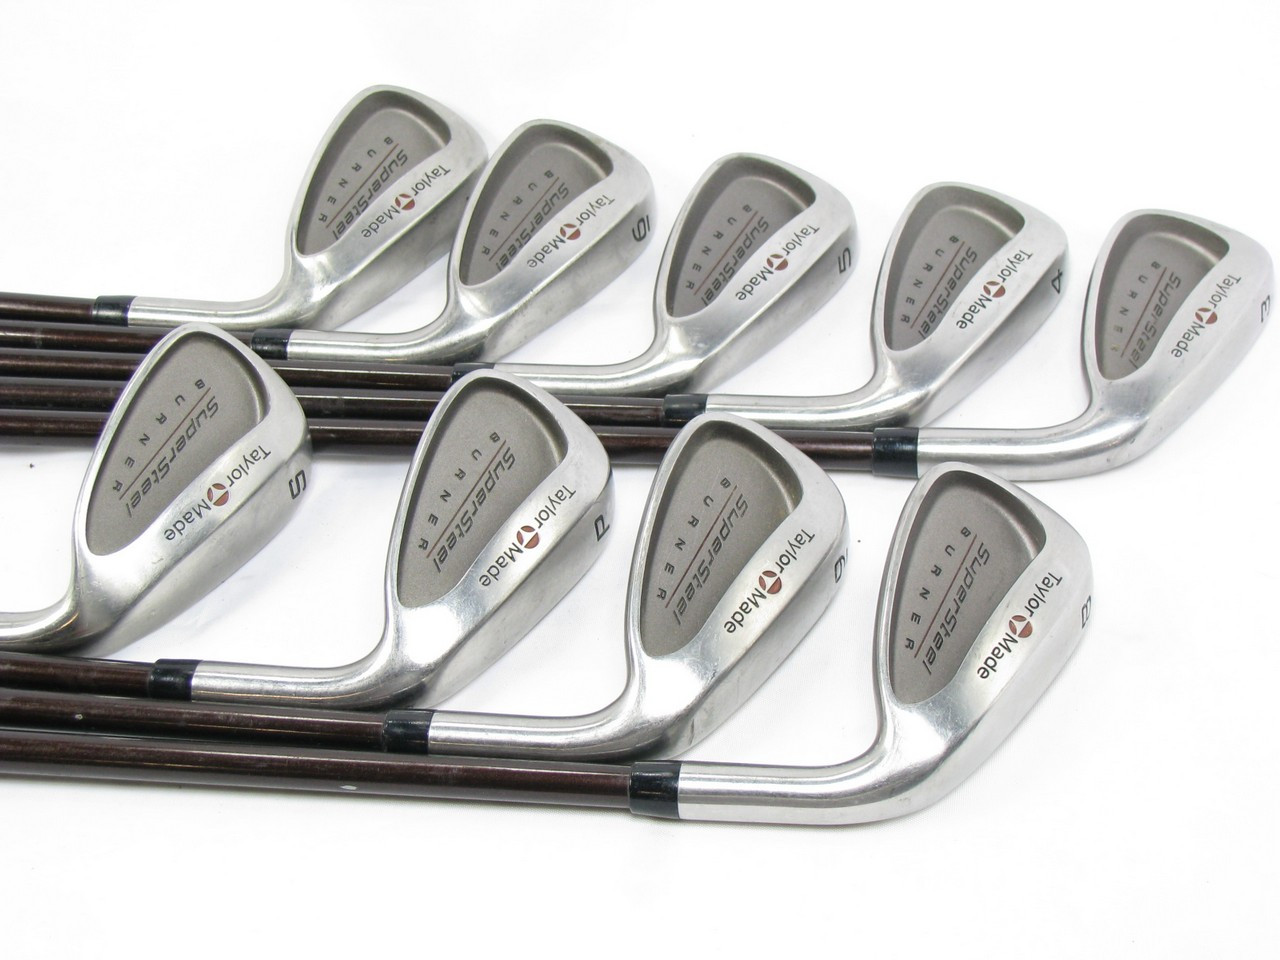 Taylormade Supersteel Burner Irons Review - Still Good And Forgiving ...